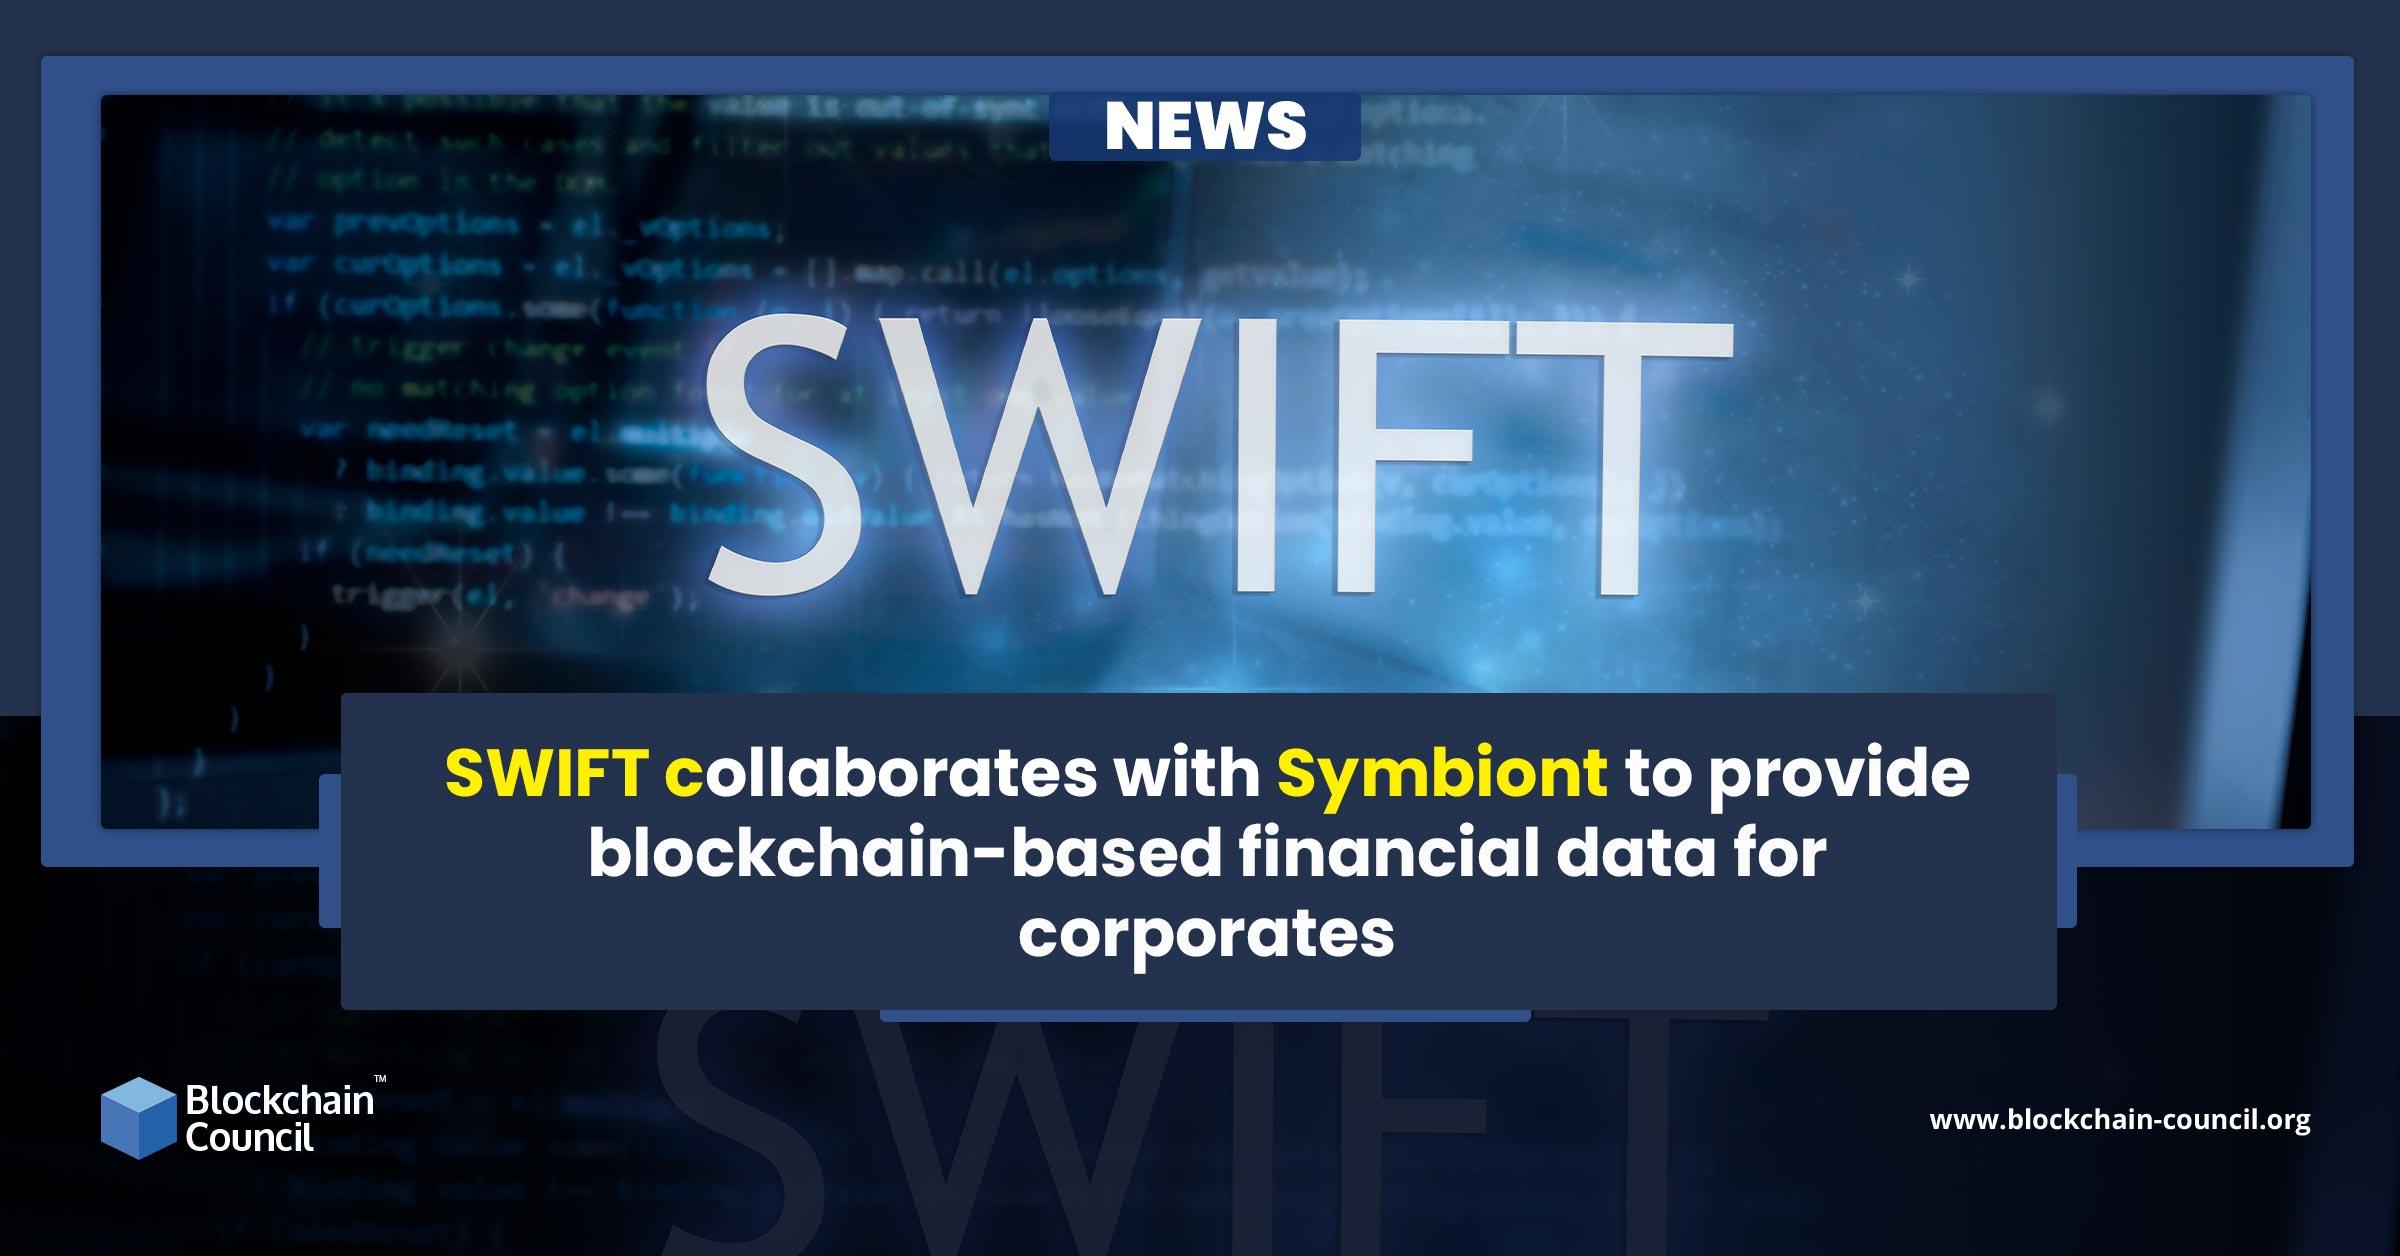 SWIFT collaborates with Symbiont to provide blockchain-based financial data for corporates